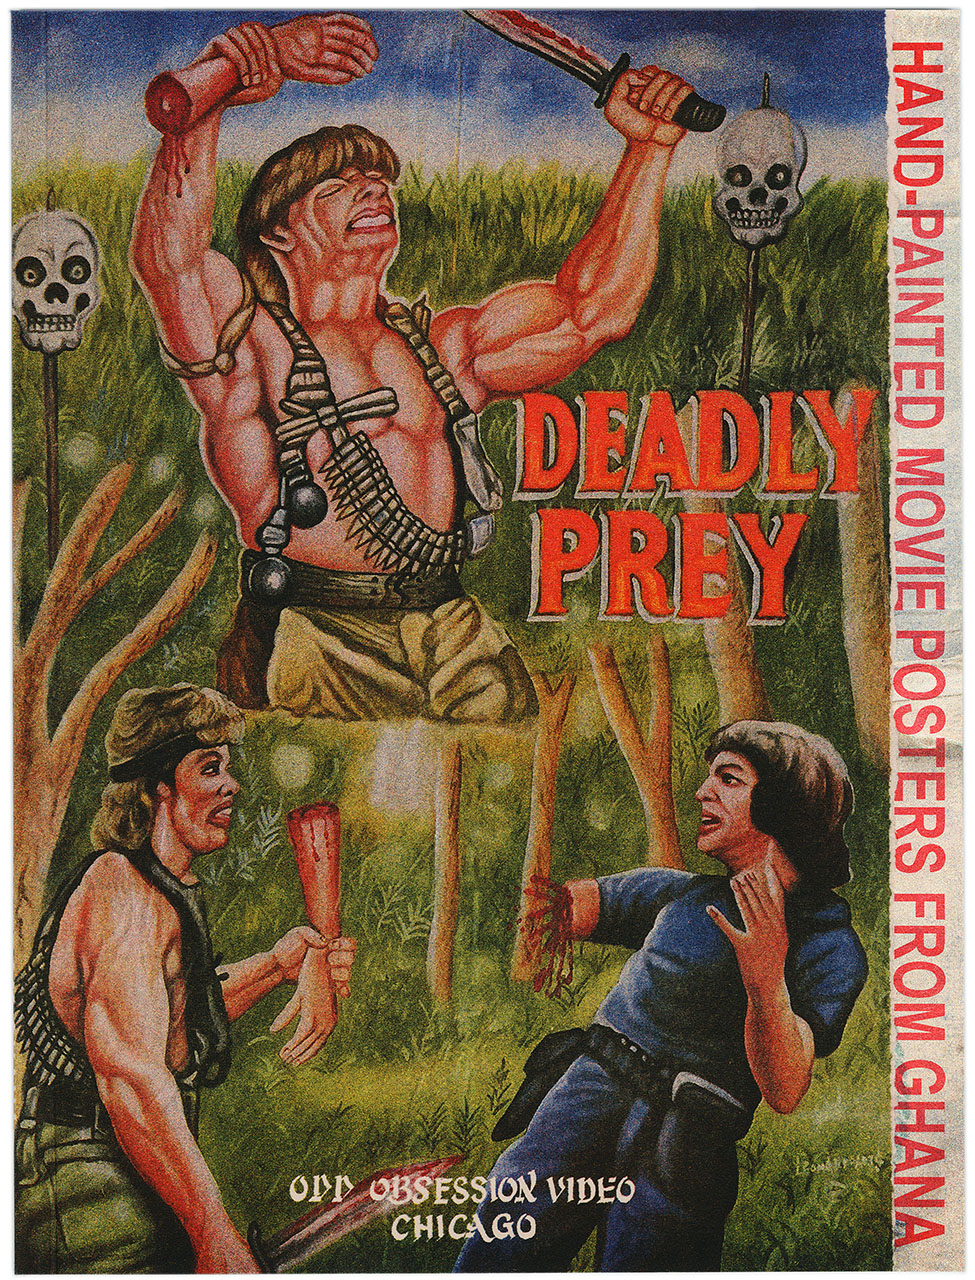 Deadly Prey: Hand-Painted Movie Posters From Ghana